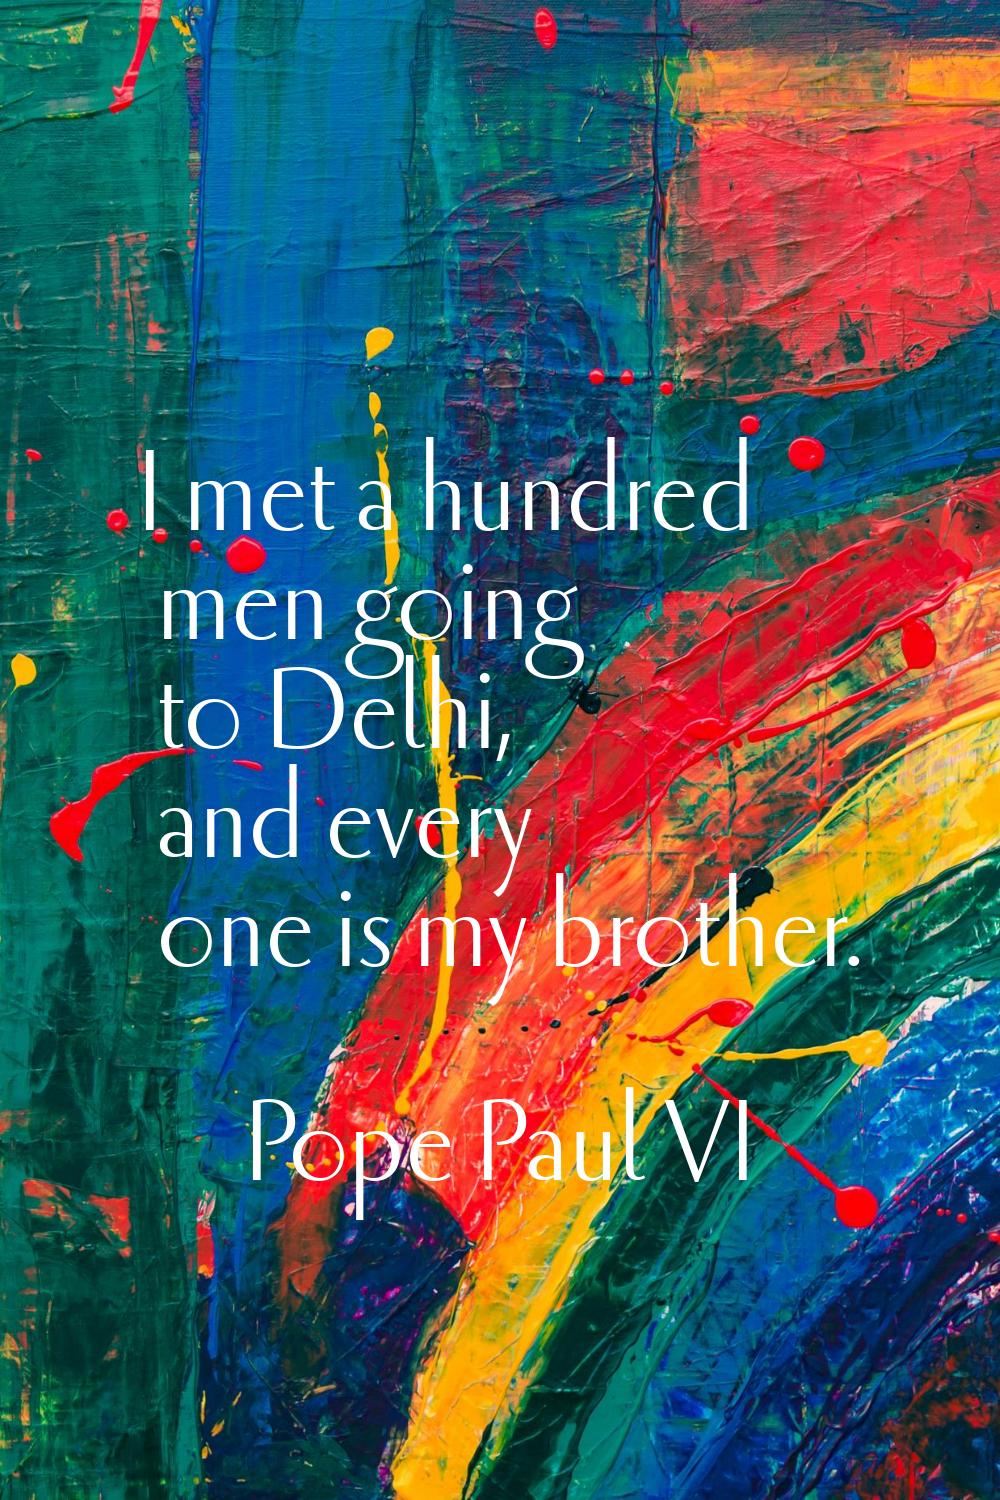 I met a hundred men going to Delhi, and every one is my brother.